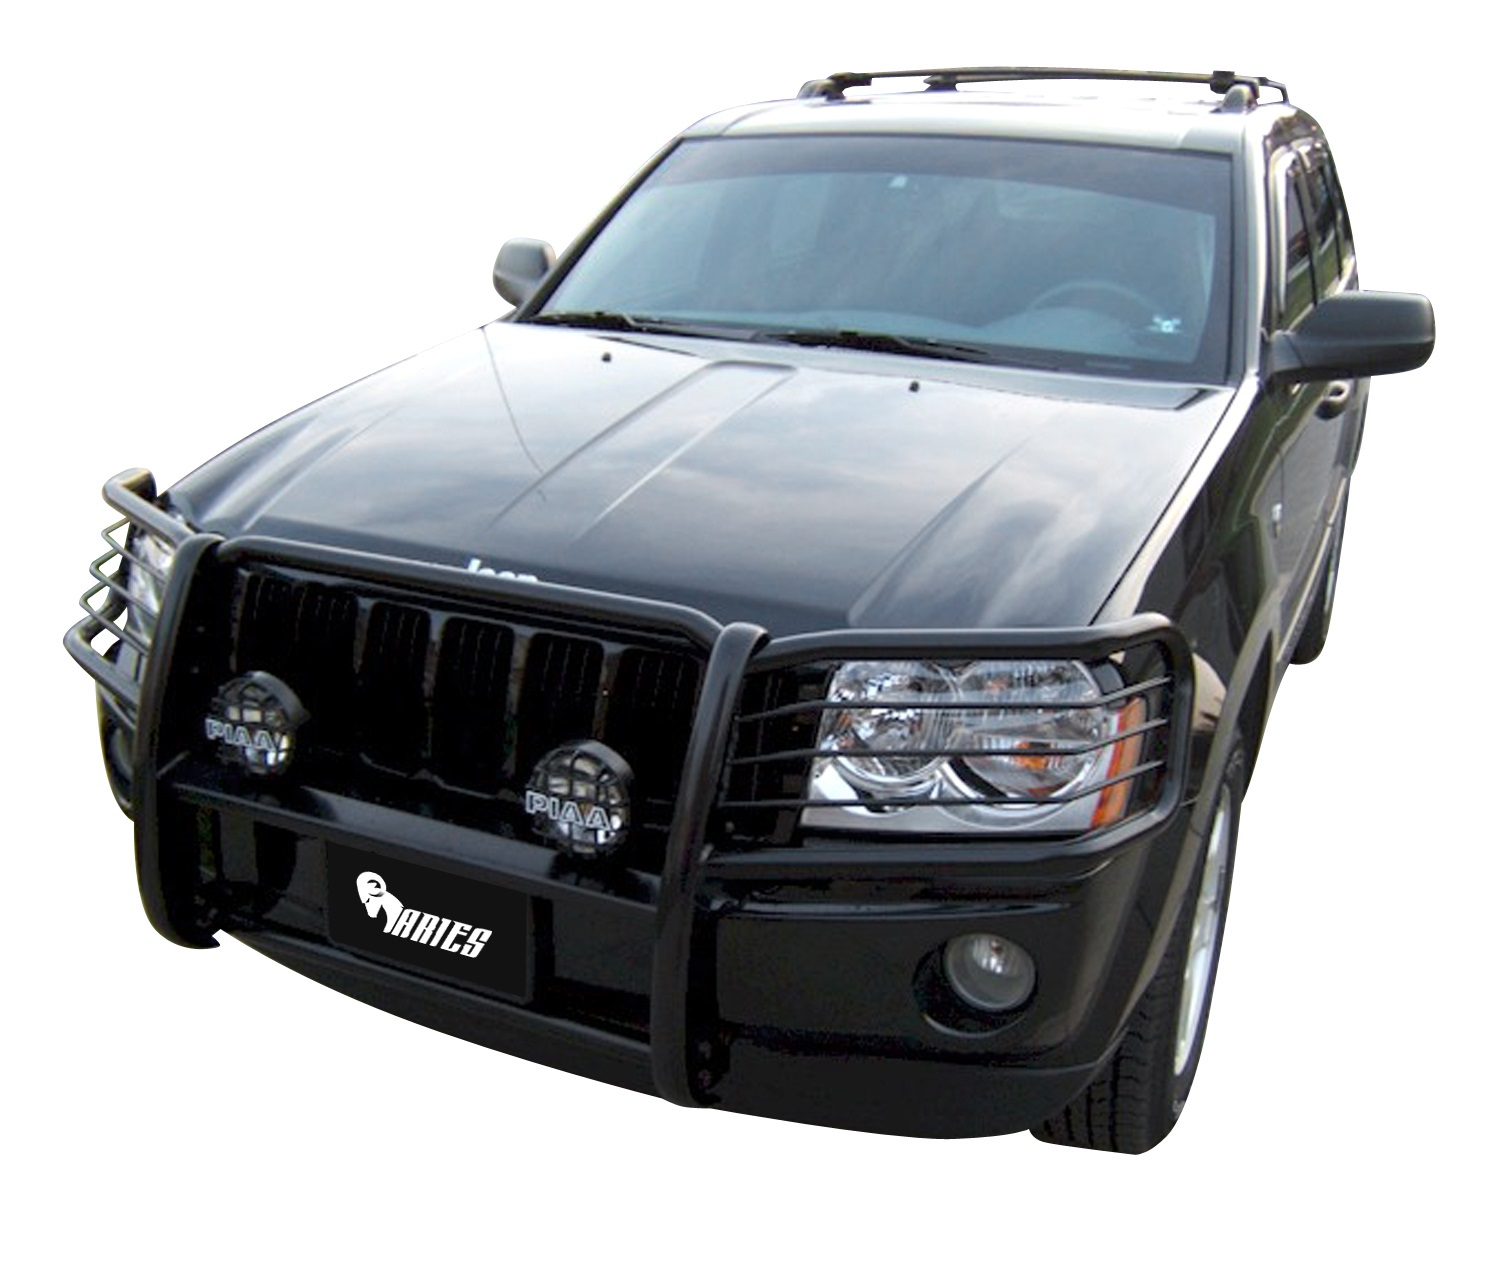 Aries Offroad Aries Offroad 1046 The Aries Bar; Grille/Brush Guard Fits Grand Cherokee (WK)